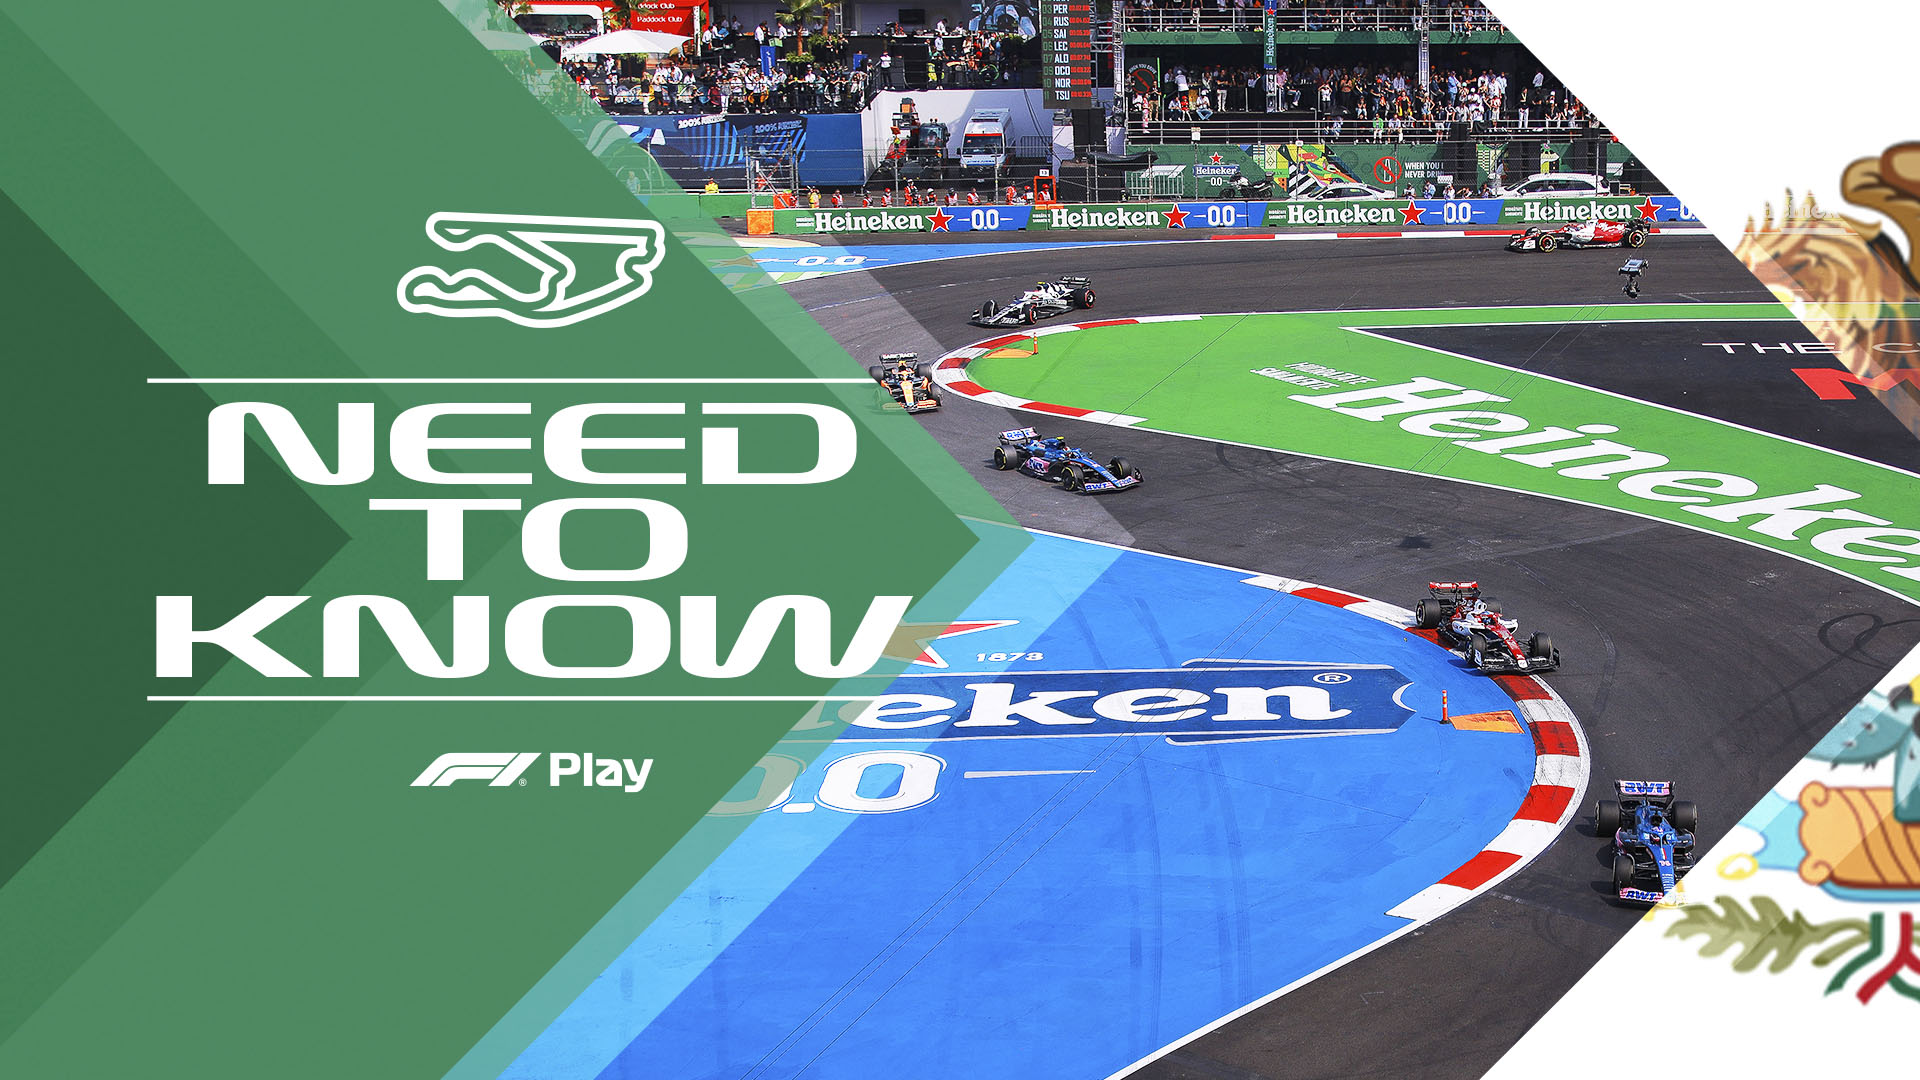 10 things we learned at the 2023 F1 Mexico Grand Prix